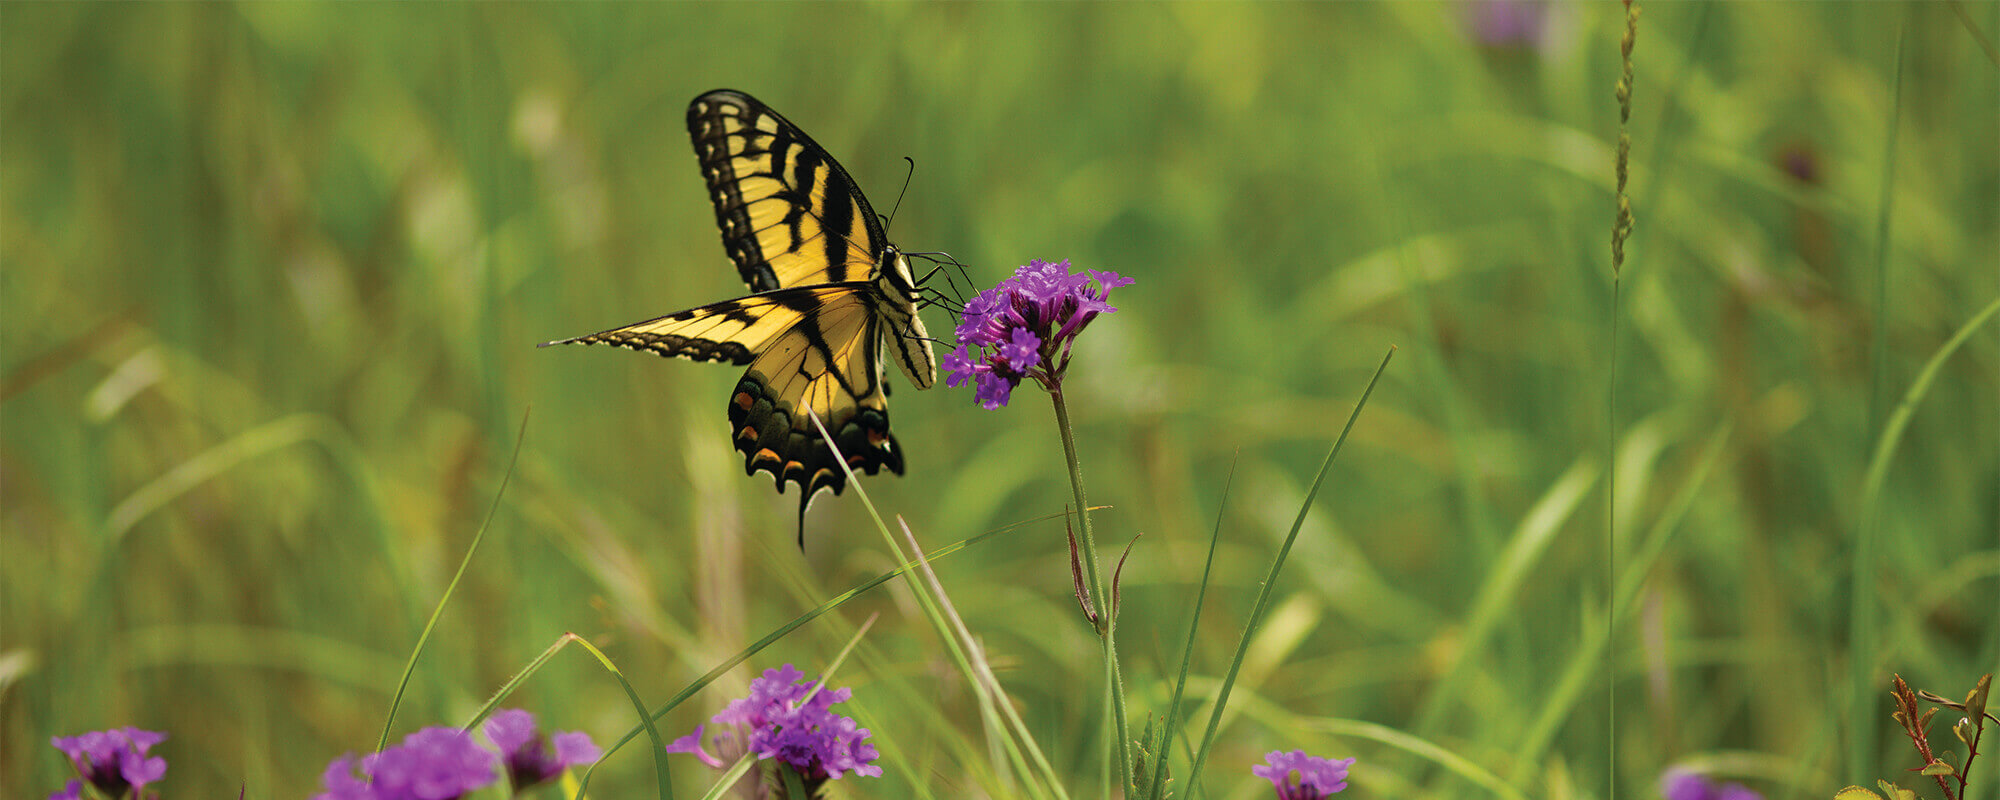 A black and yellow butterfly rests on a purple flower in the middle of a green summer pasture